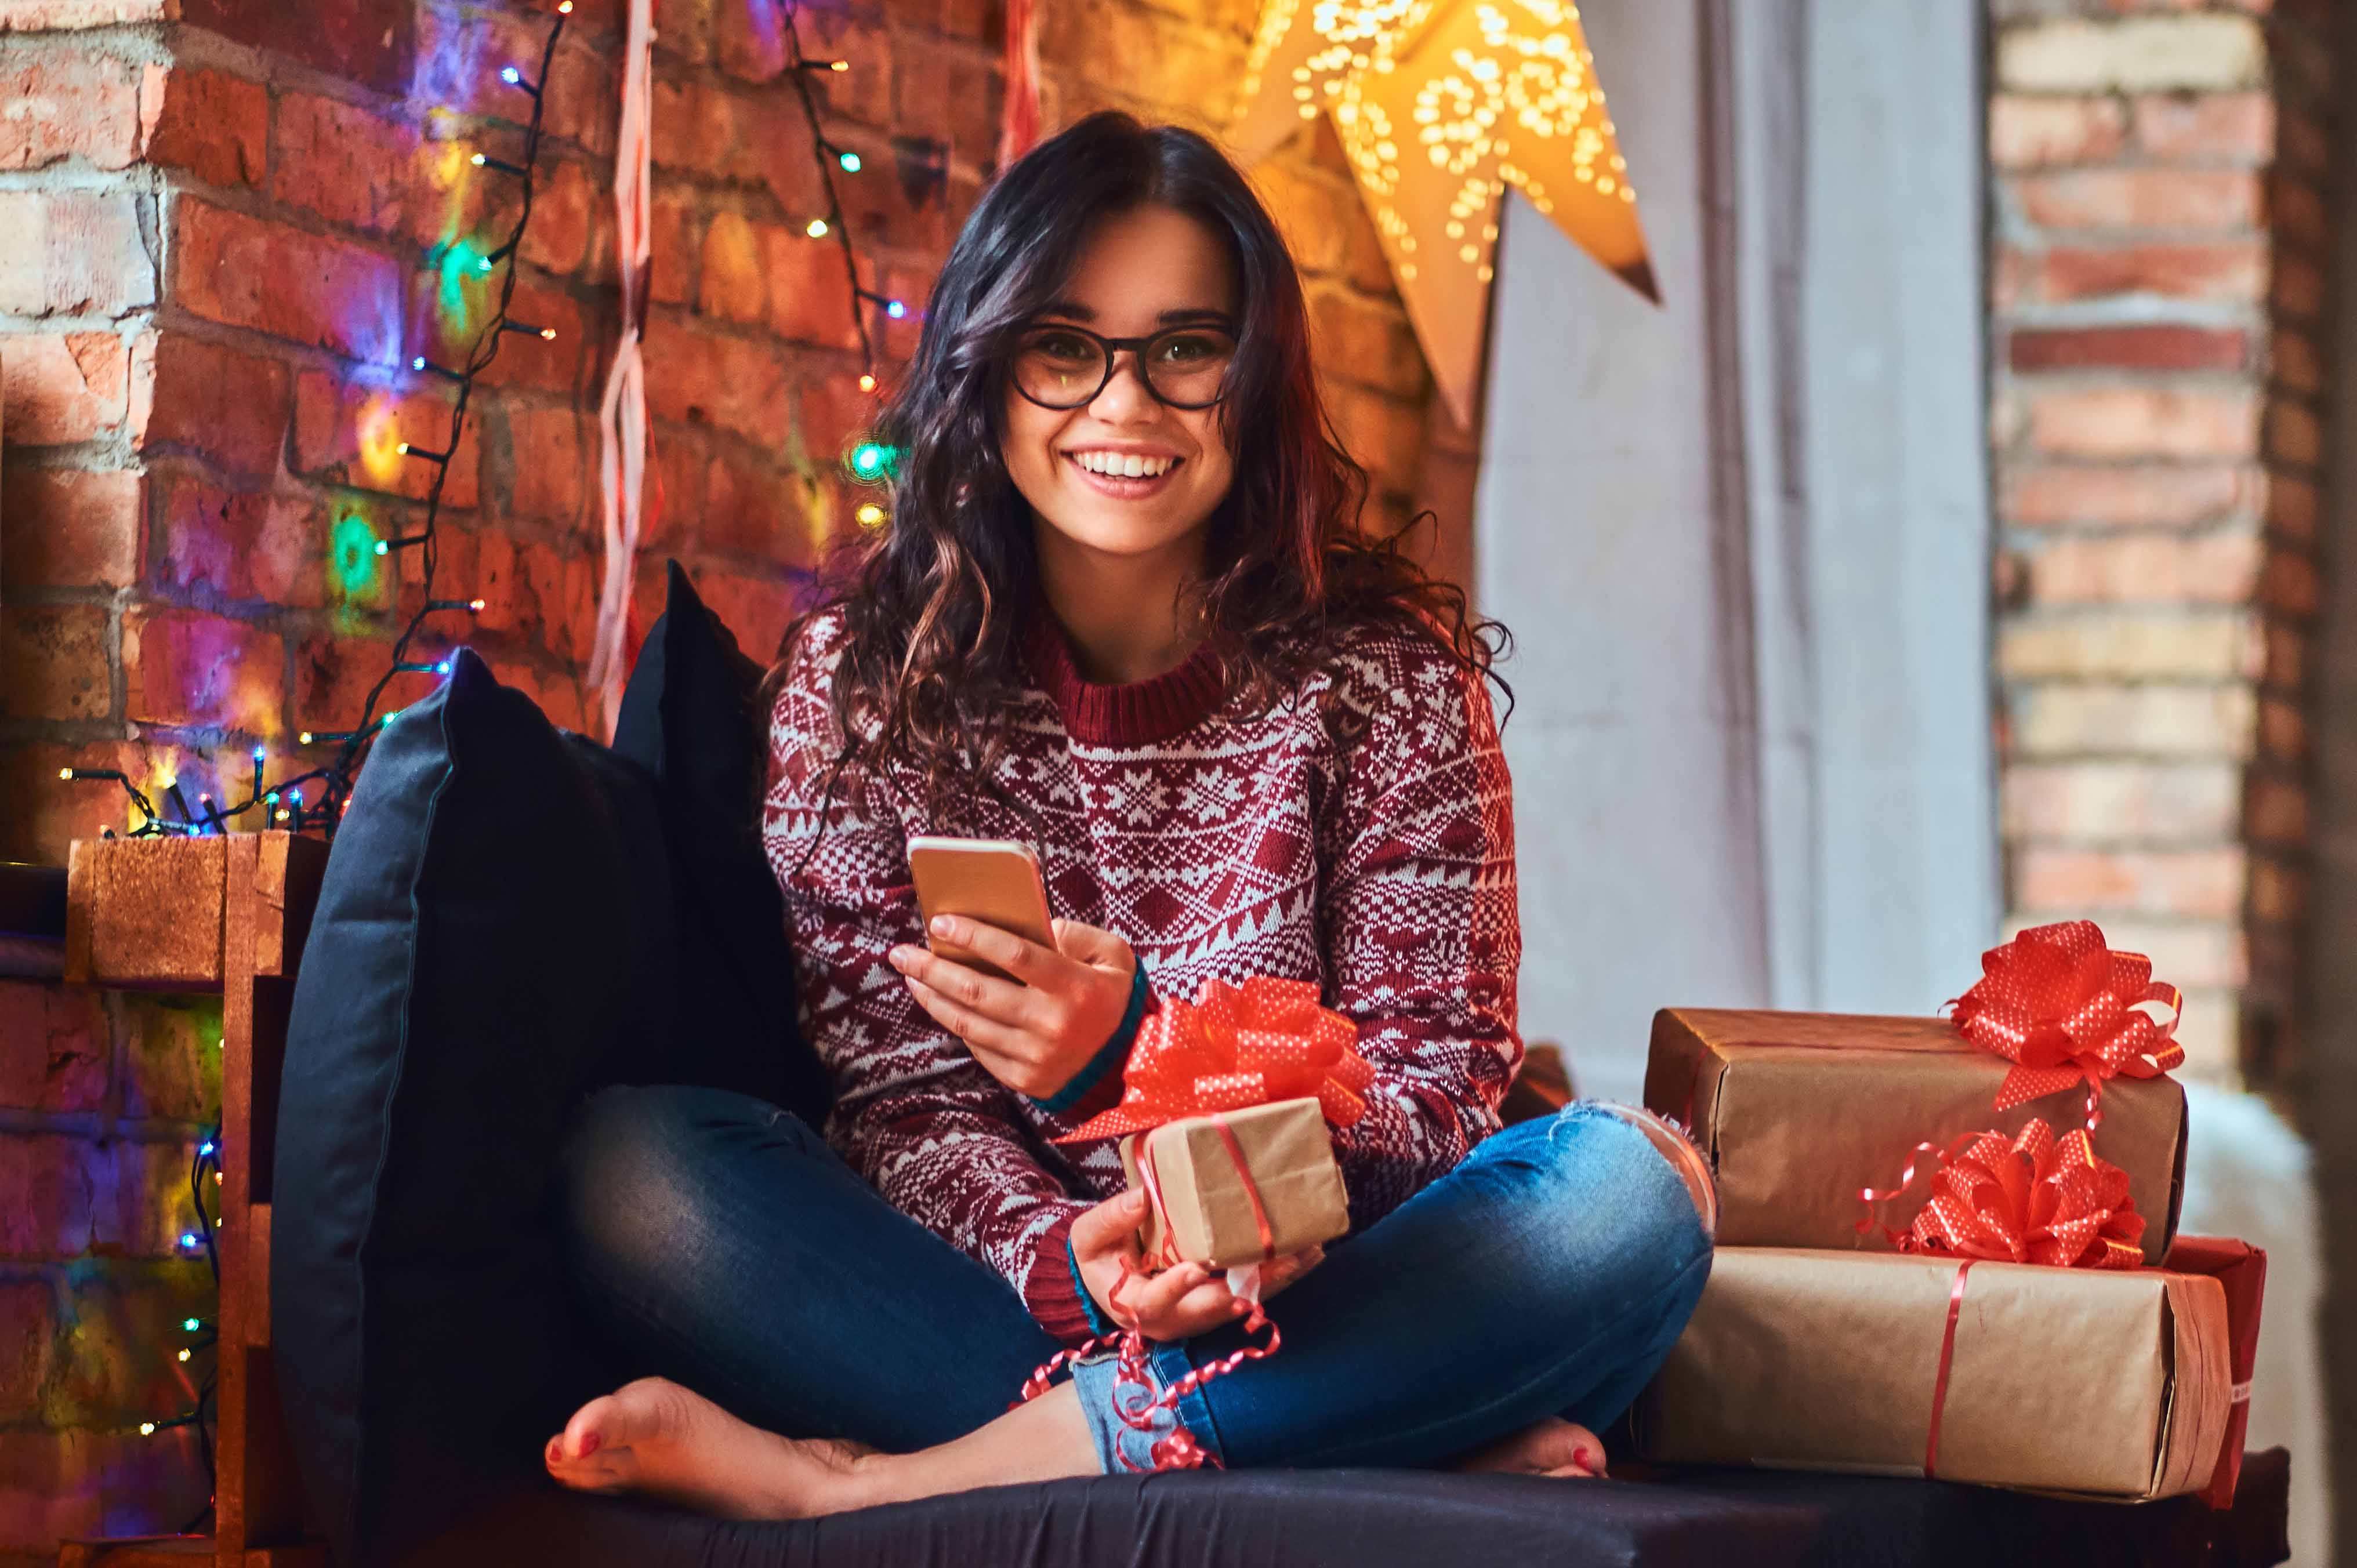 Smiling female college student sitting under Christmas lights, holding gifts.